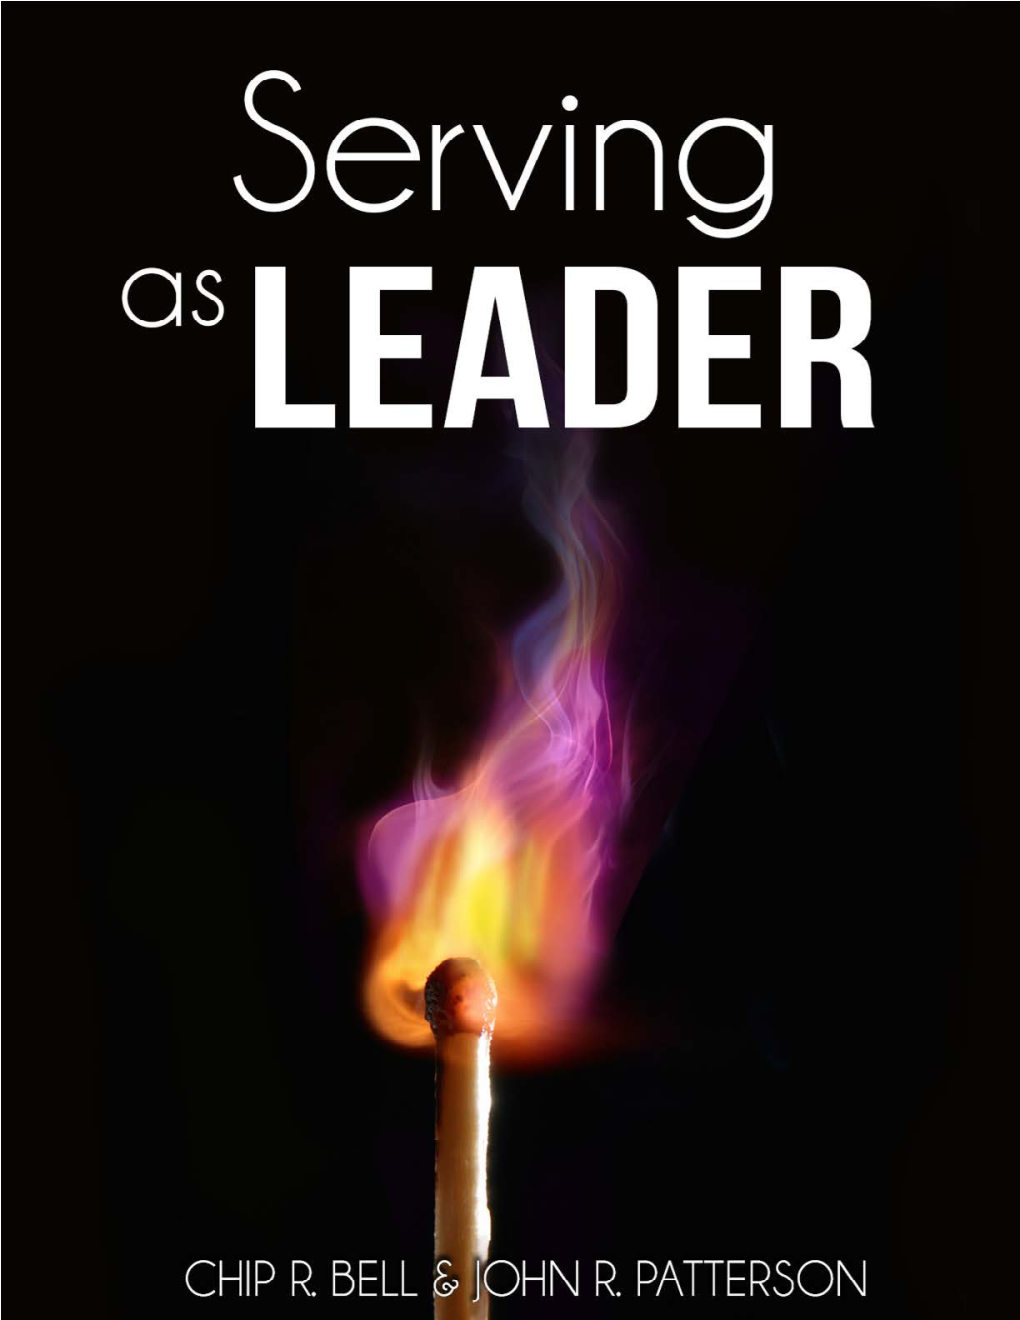 Serving As Leader Chip R. Bell & John R. Patterson ©Chip Bell Group